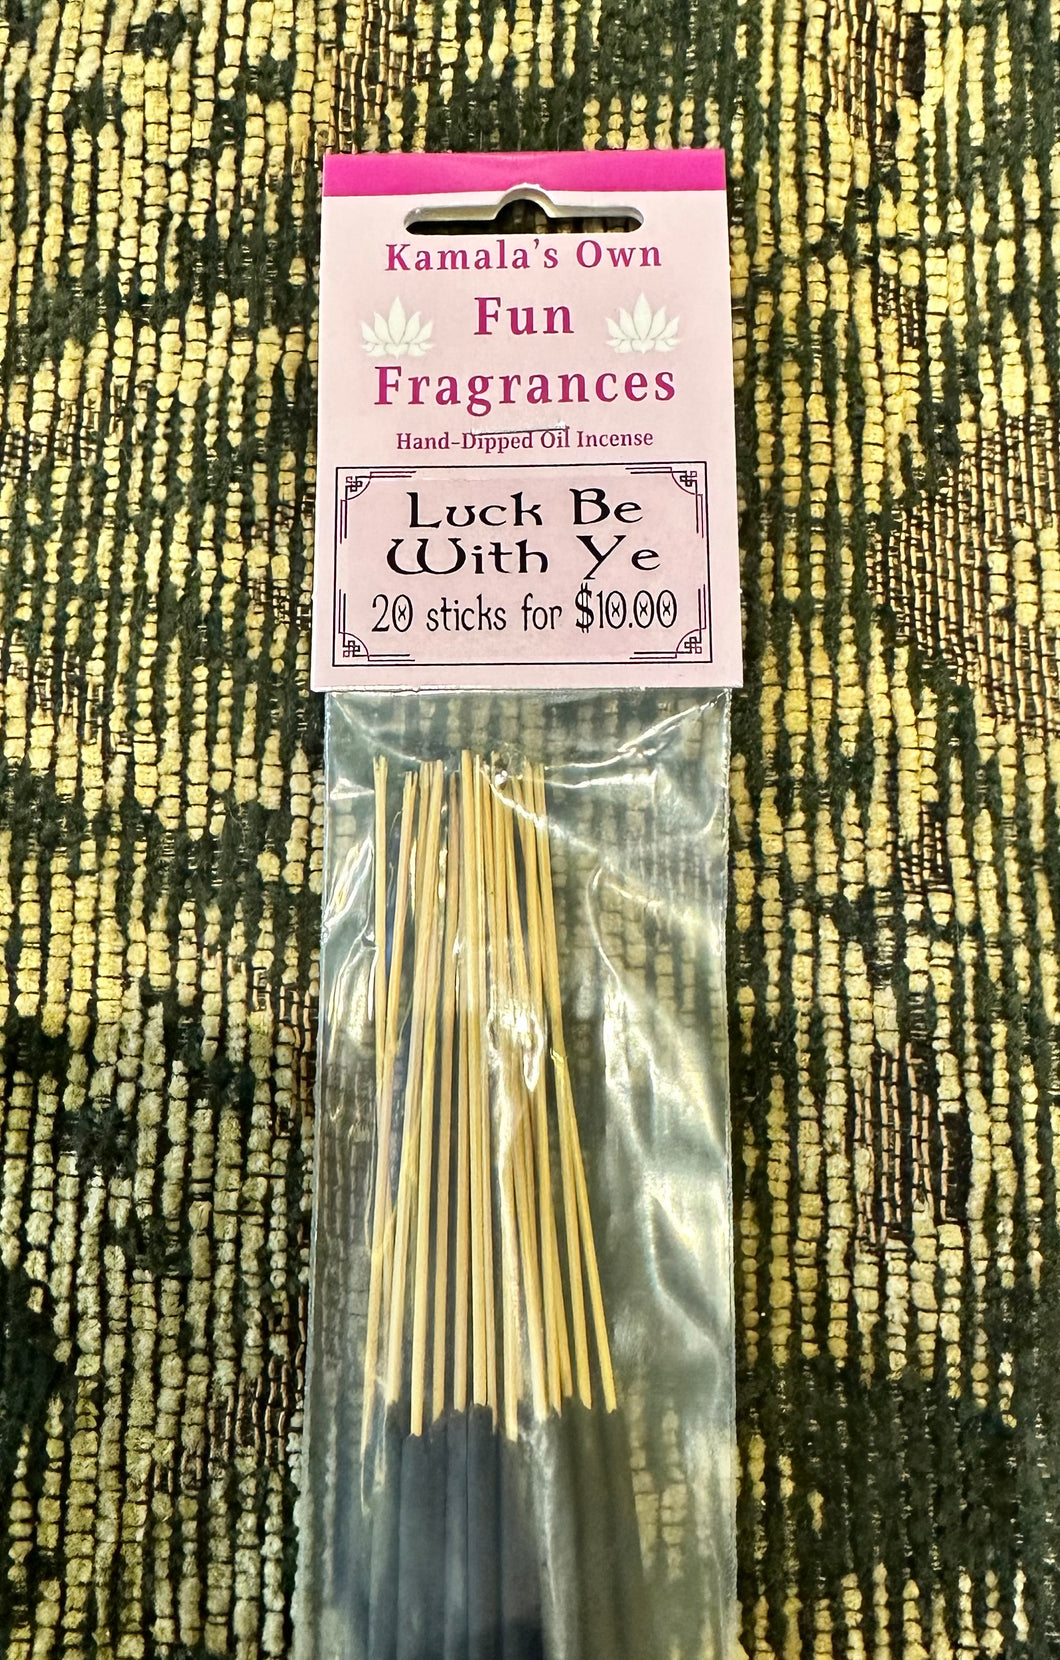 Luck Be With Ye stick incense